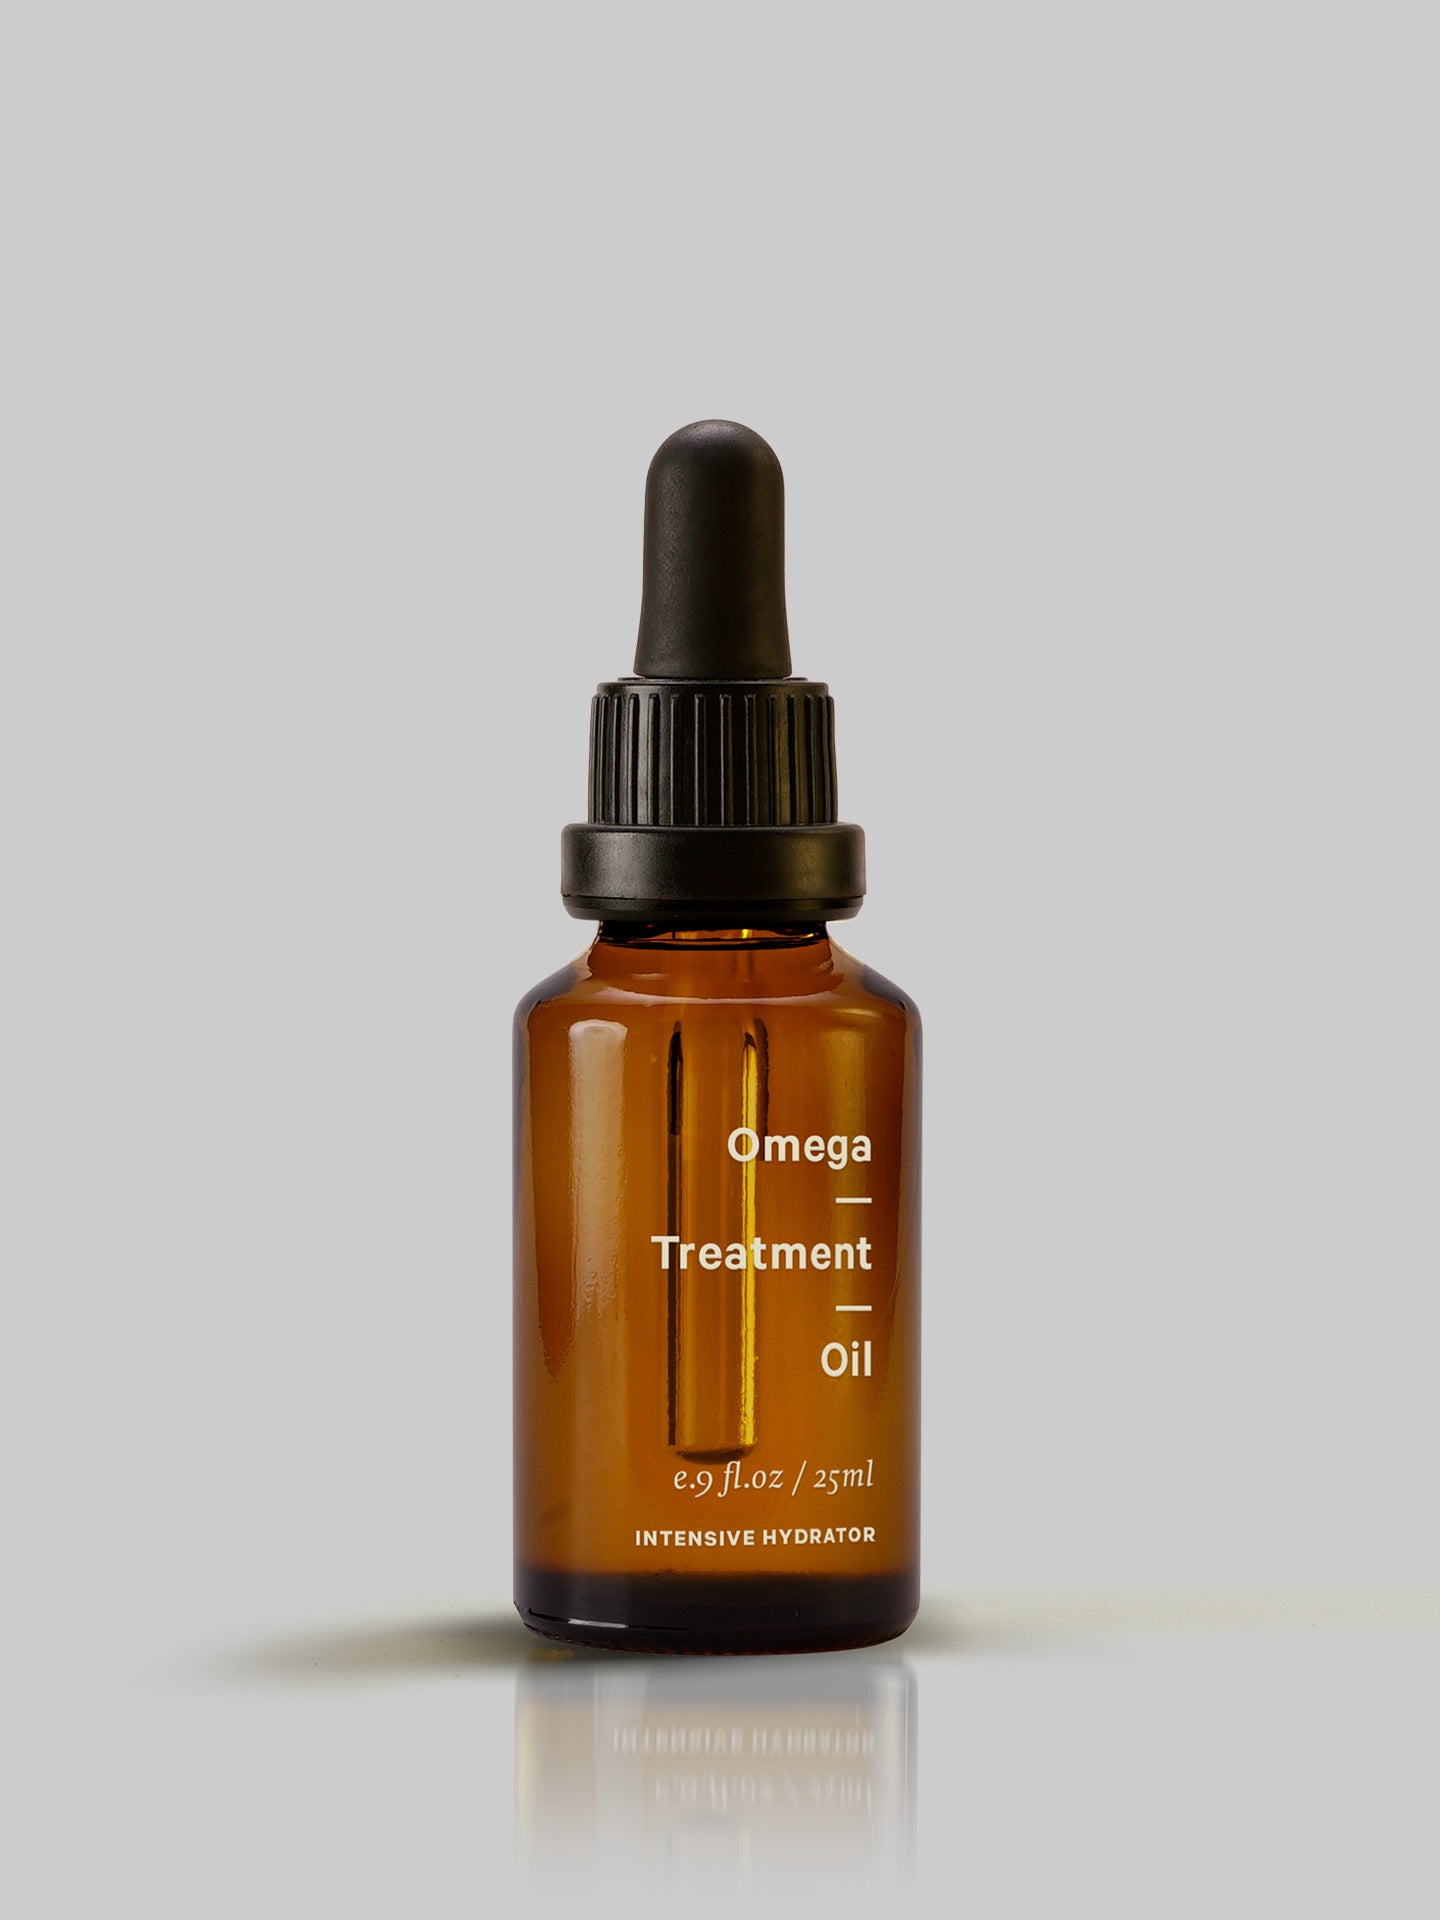 A bottle of MARYSE Omega – Treatment Oil on a grey background.